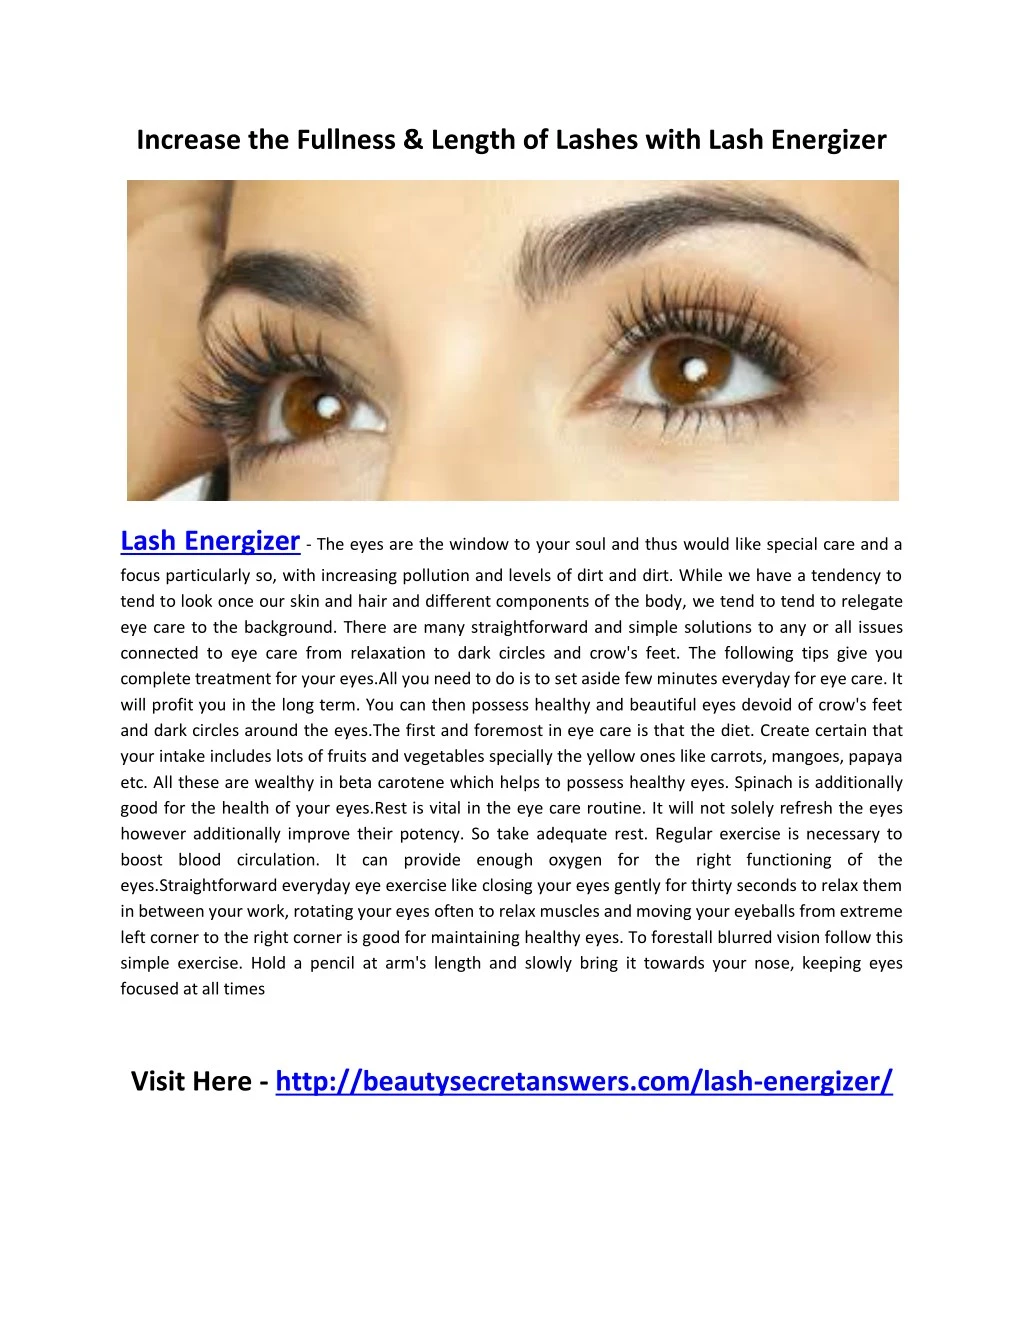 increase the fullness length of lashes with lash